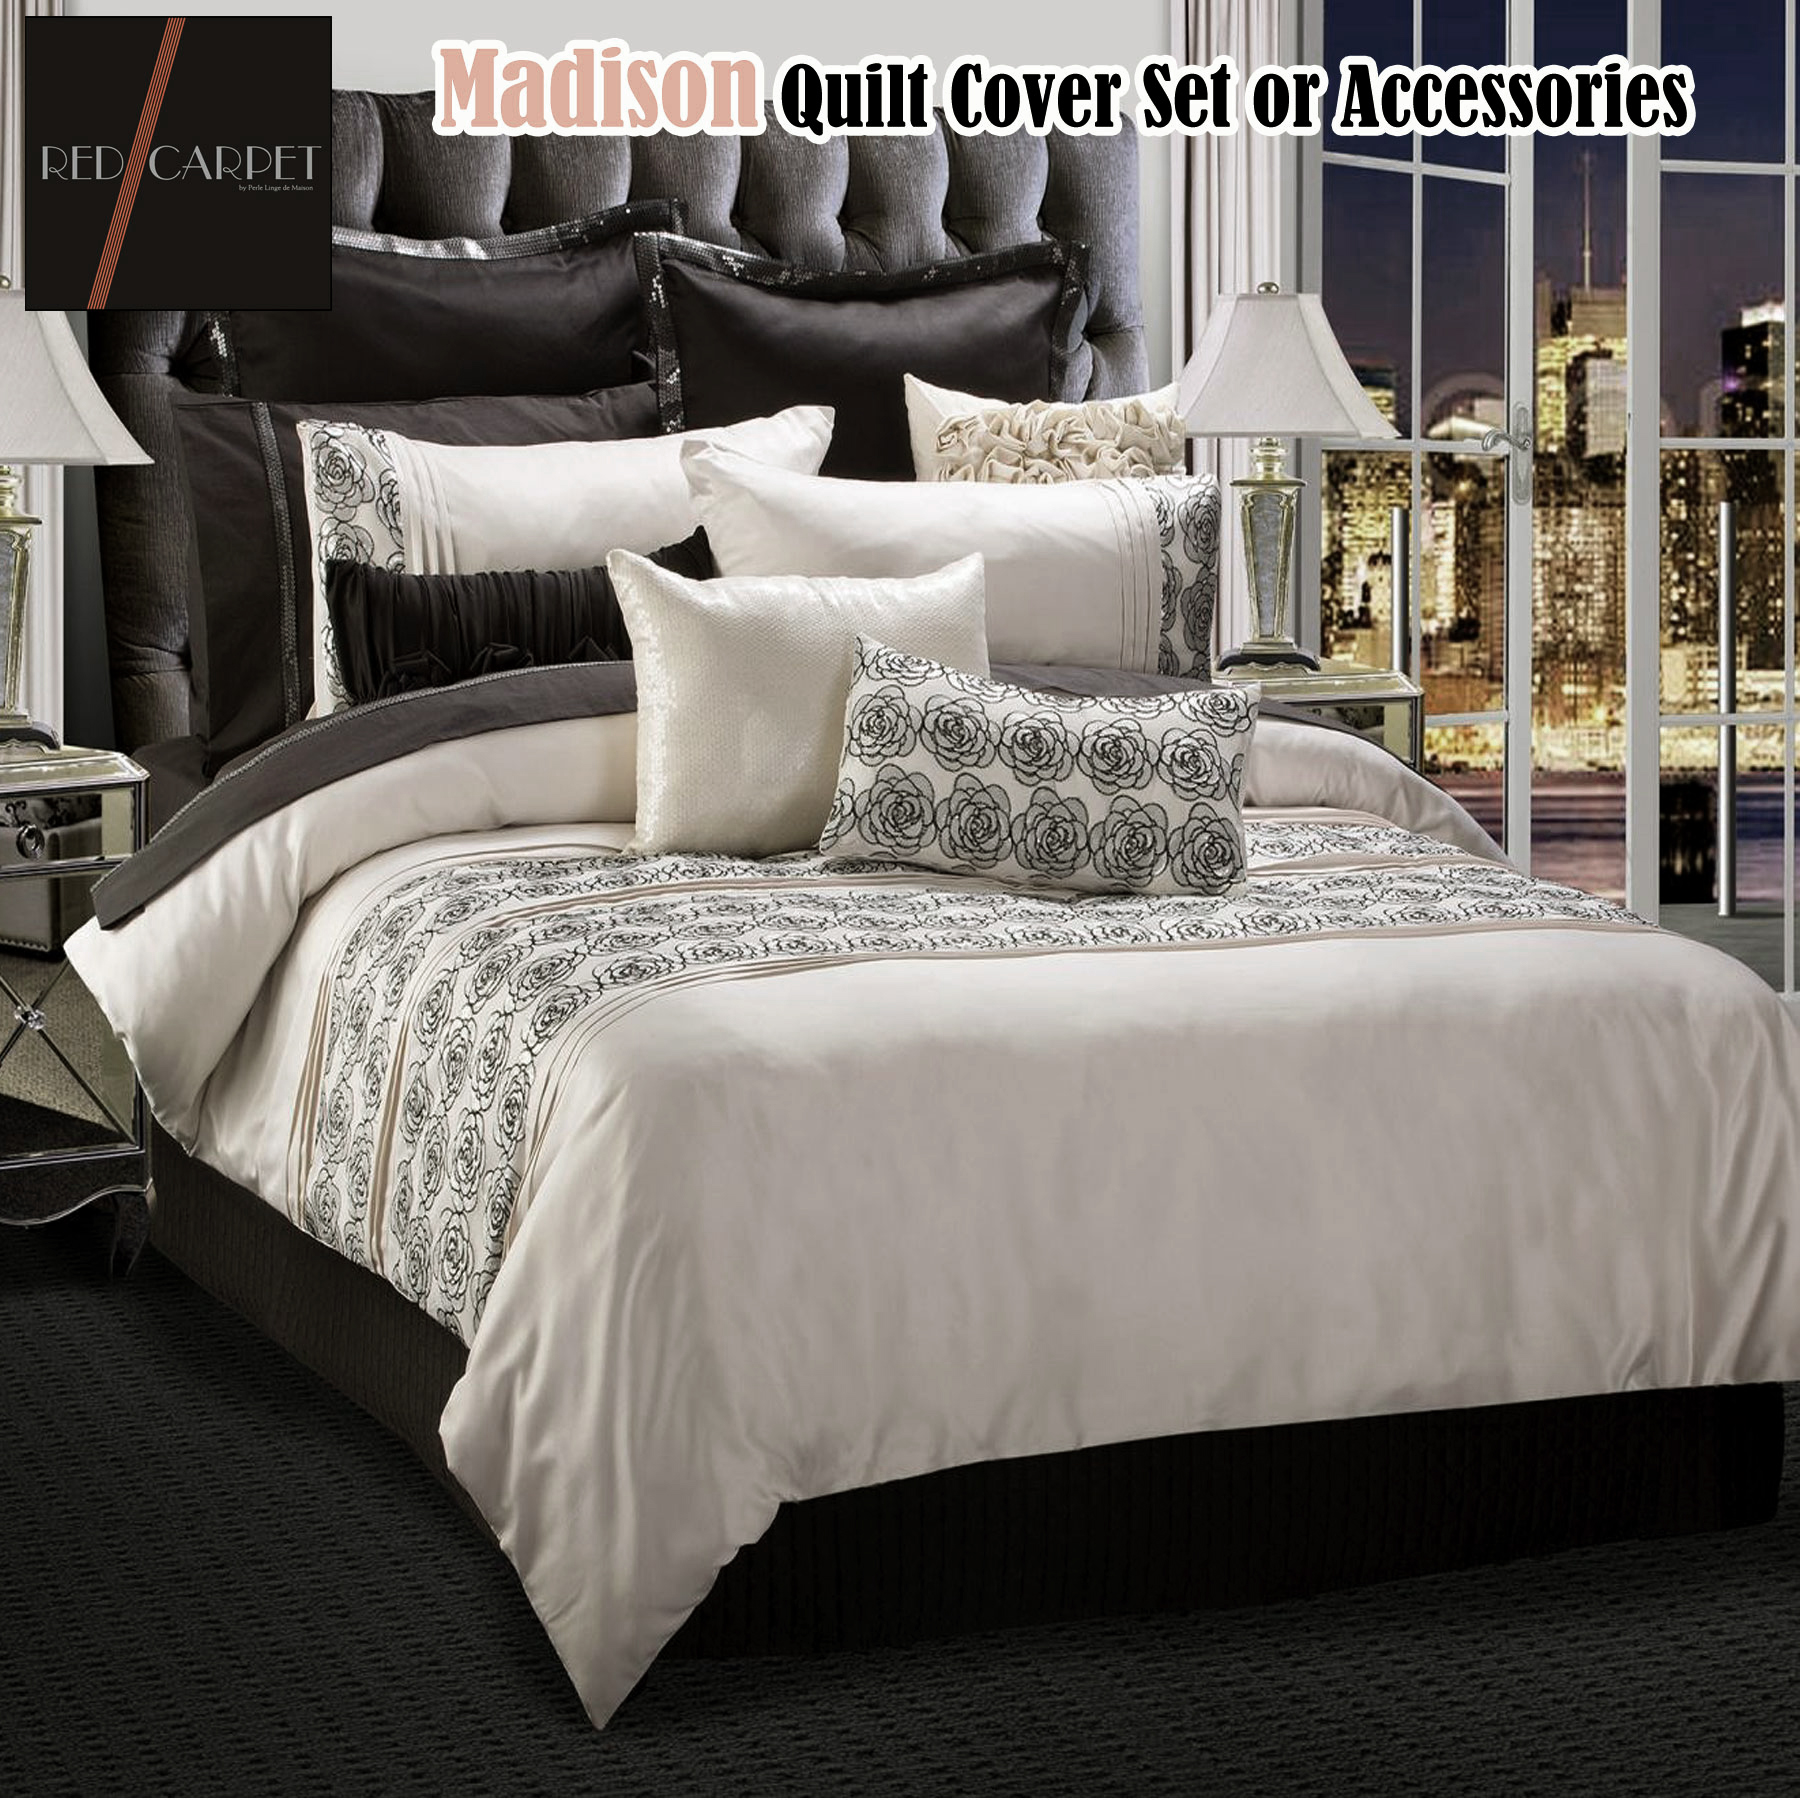 Bedding Sets Duvet Covers Home, Super King Size Bed Quilt Covers